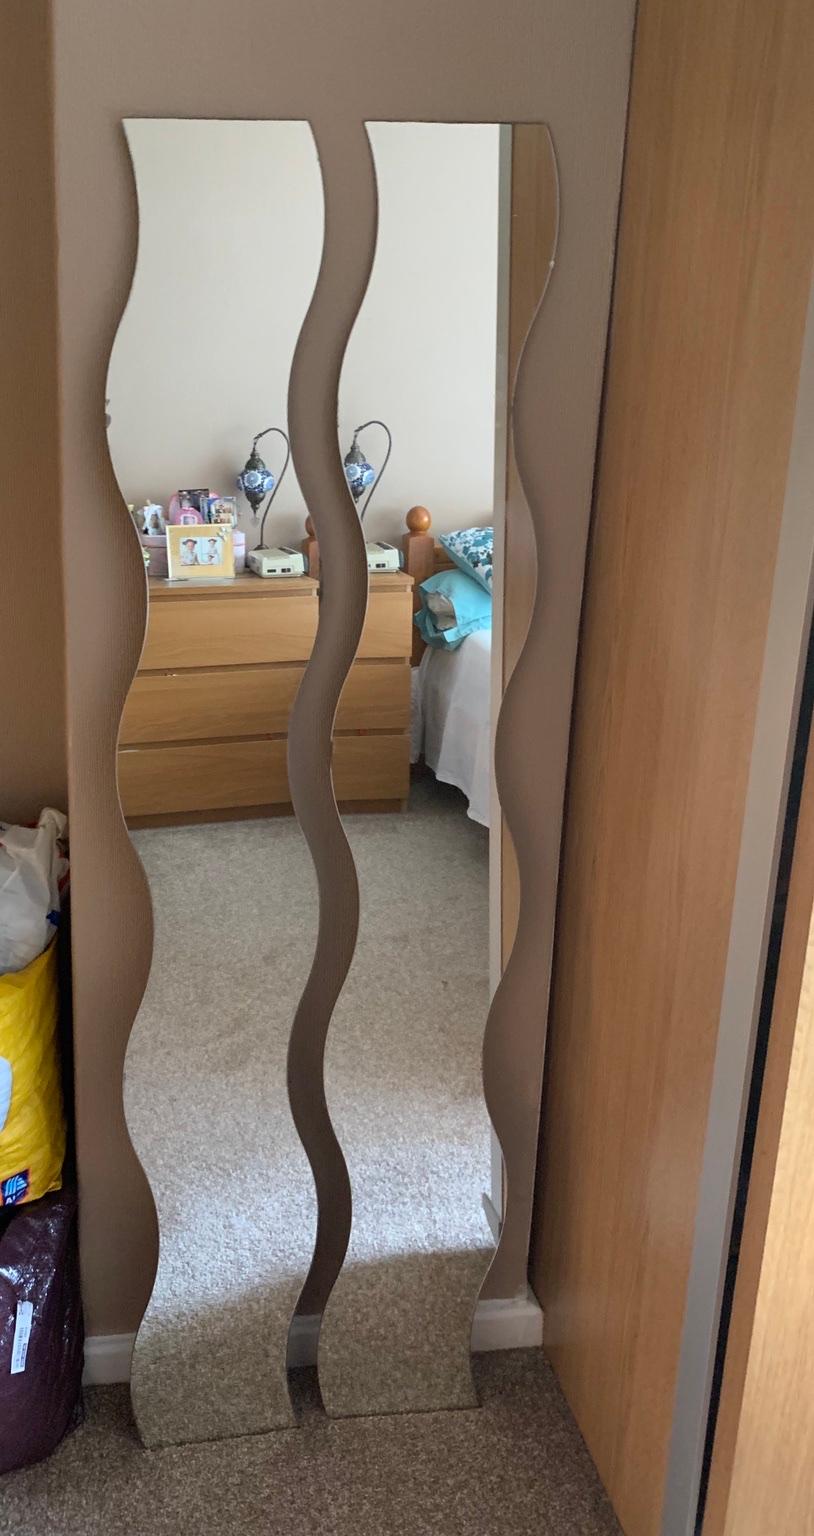 2 x Wavy Ikea Mirrors in B29 Birmingham for £7.50 for sale | Shpock